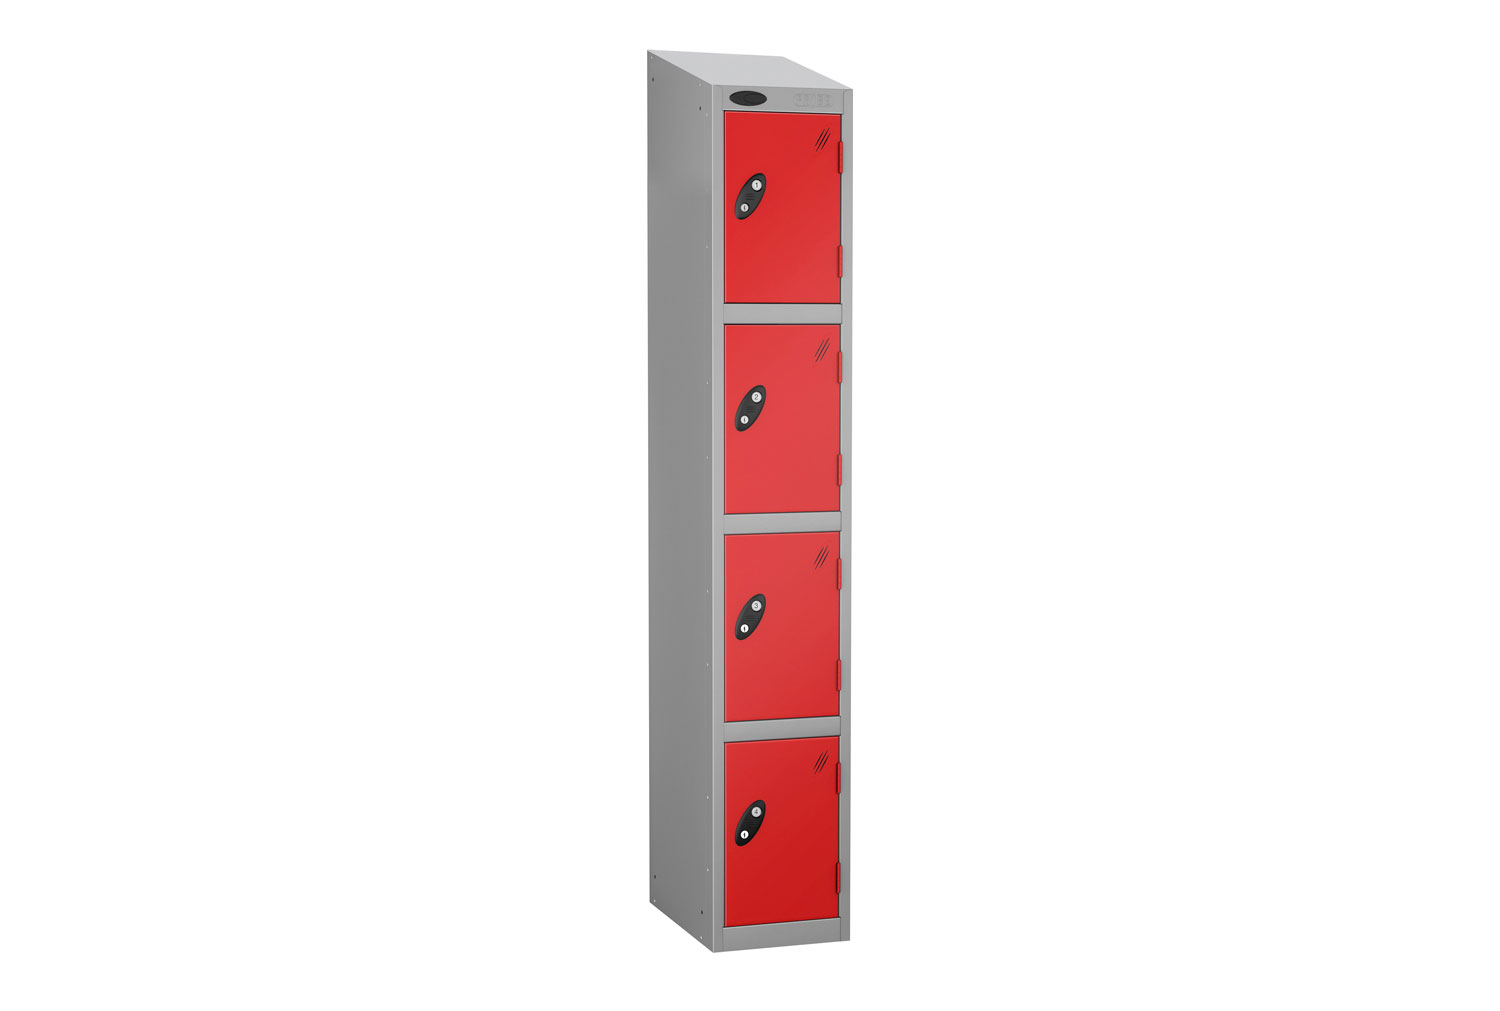 Probe Everyday 4 Door Locker With Sloping Top, 38wx46dx193h (cm), Hasp Lock, Silver Body, Red